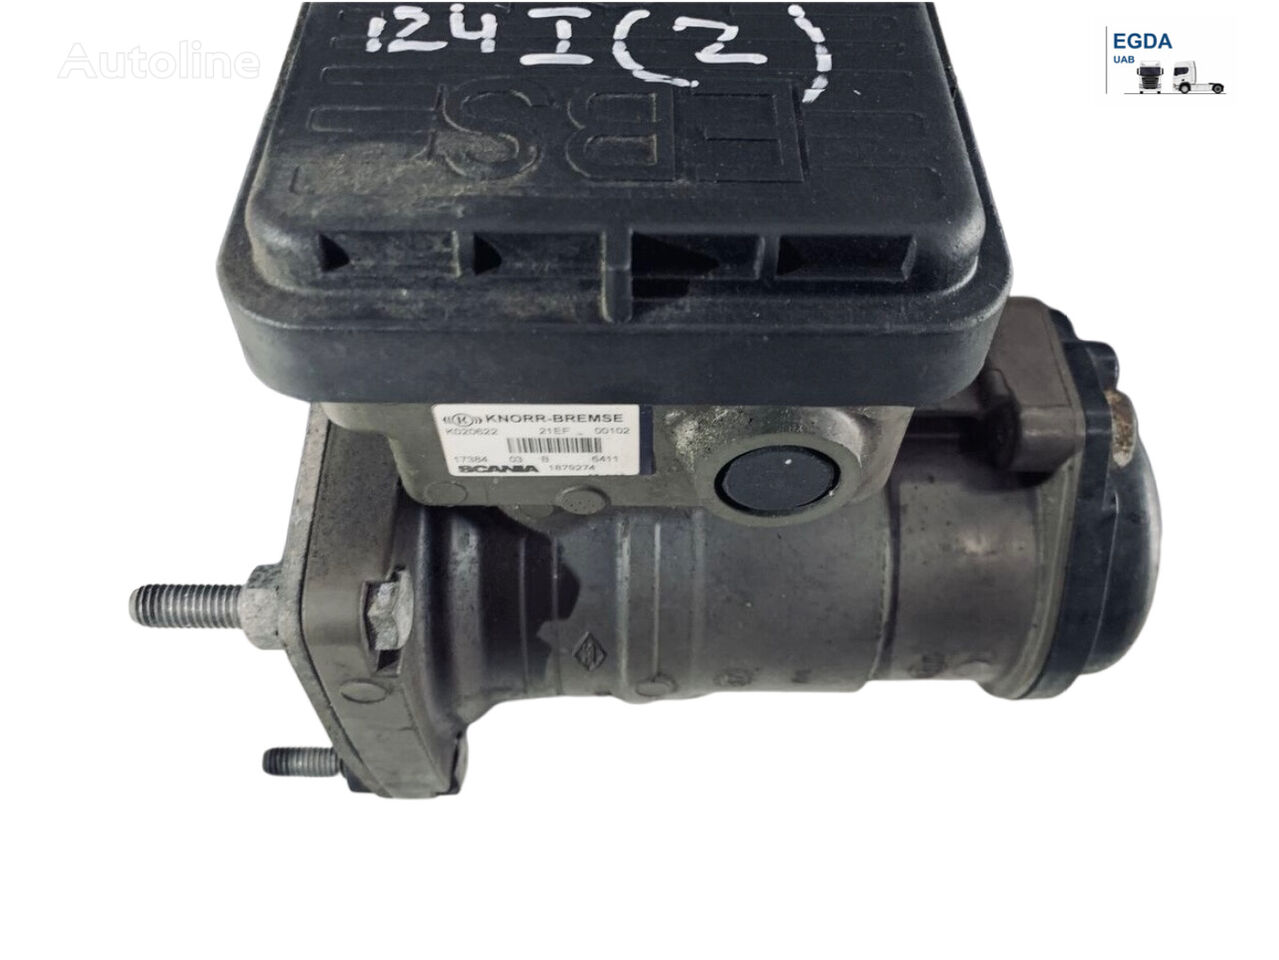 124 Knorr Bremse pneumatic valve for Scania truck tractor